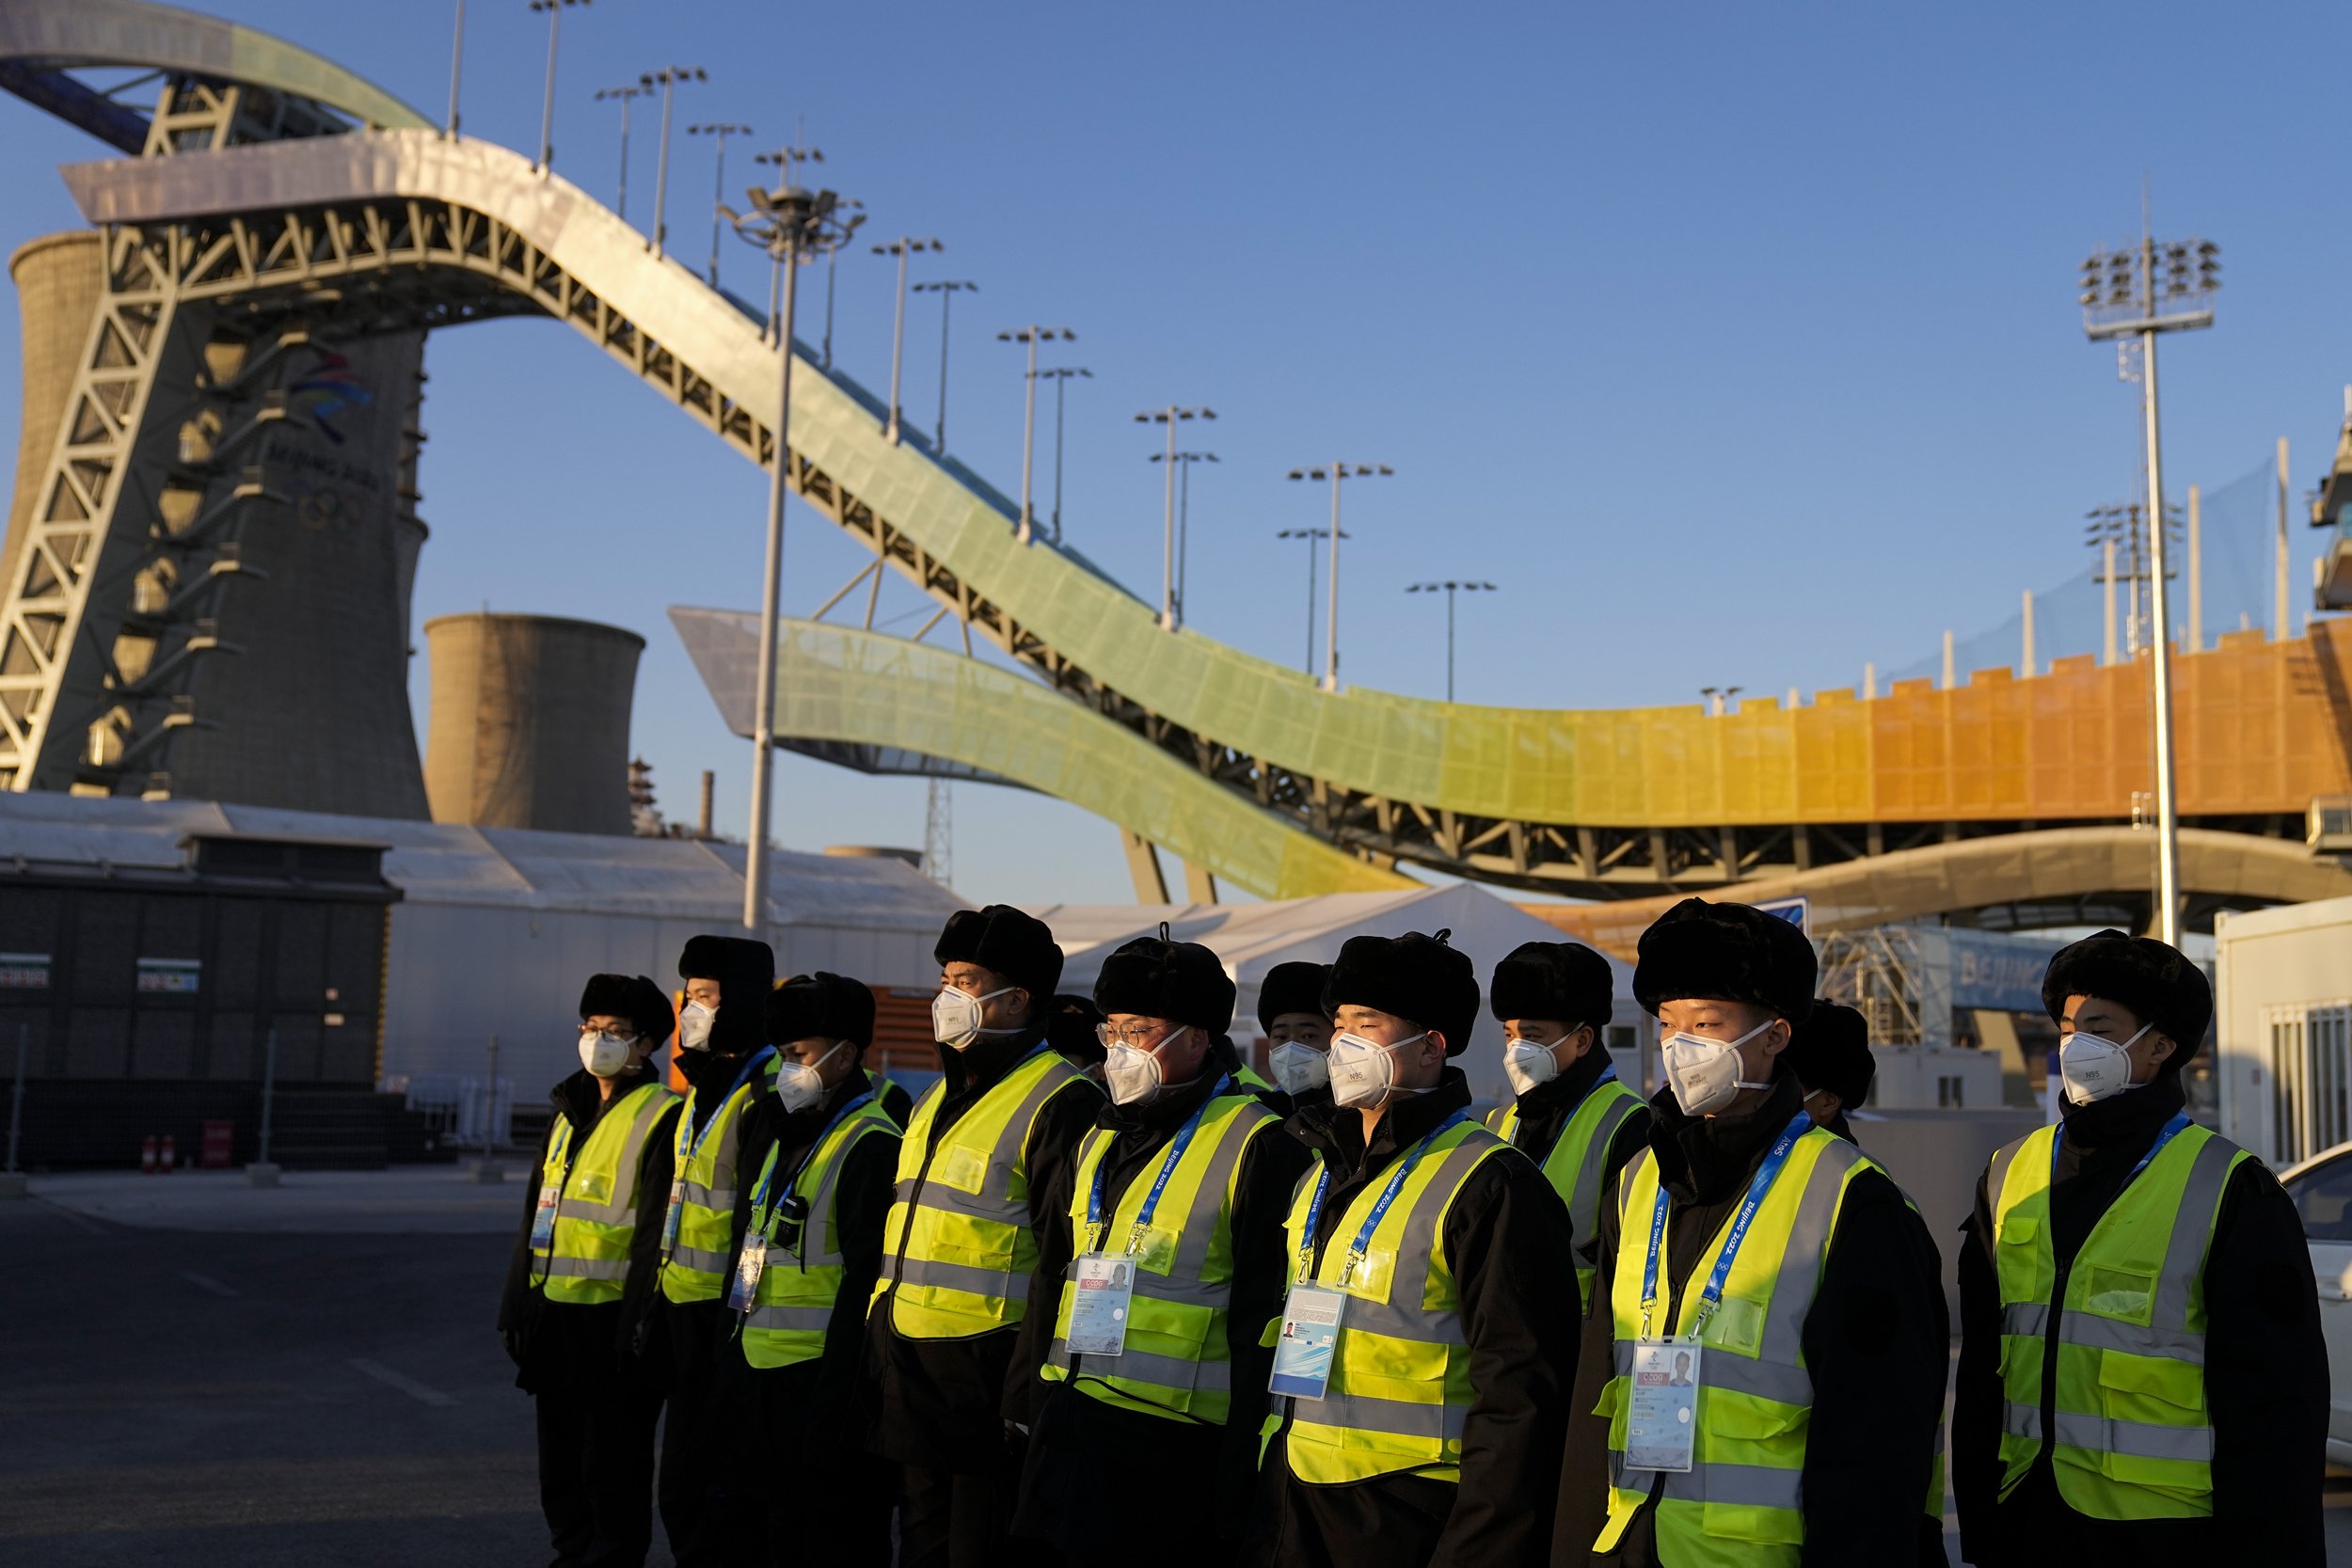  Security personnel gather in the parking lot of the Big Air Shougang ahead of the 2022 Winter Olympics, Tuesday, Feb. 1, 2022, in Beijing. (AP Photo/Jae C. Hong) 